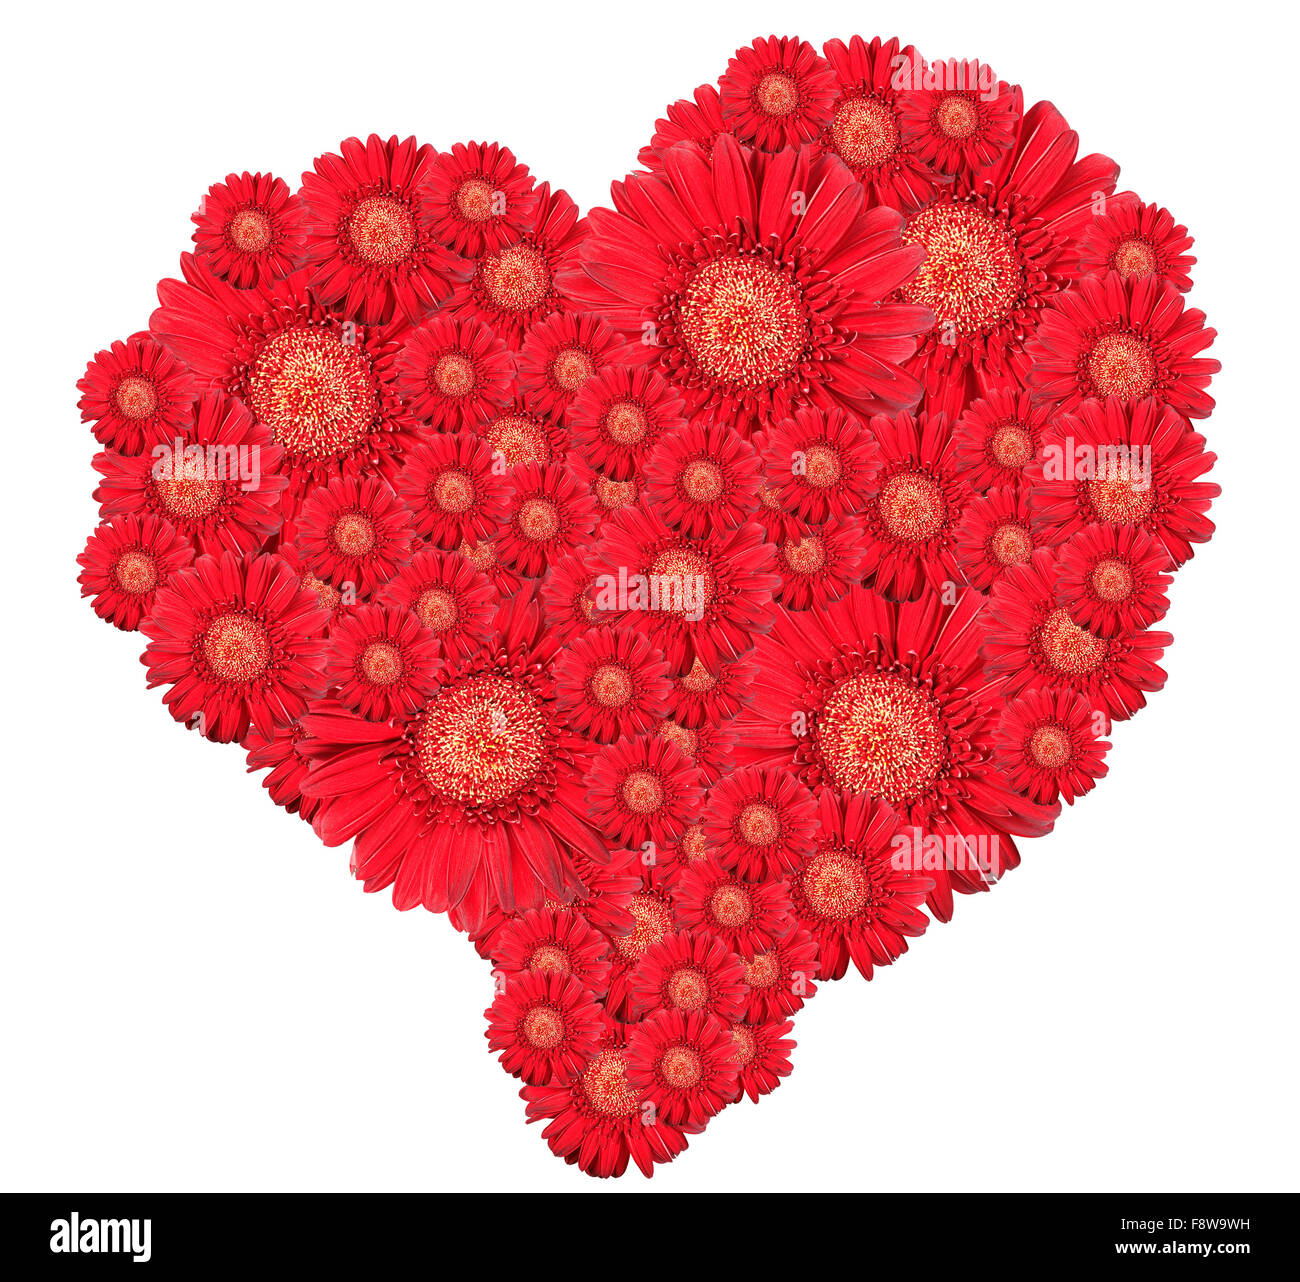 Bouquet of red flowers as heart-form Stock Photo